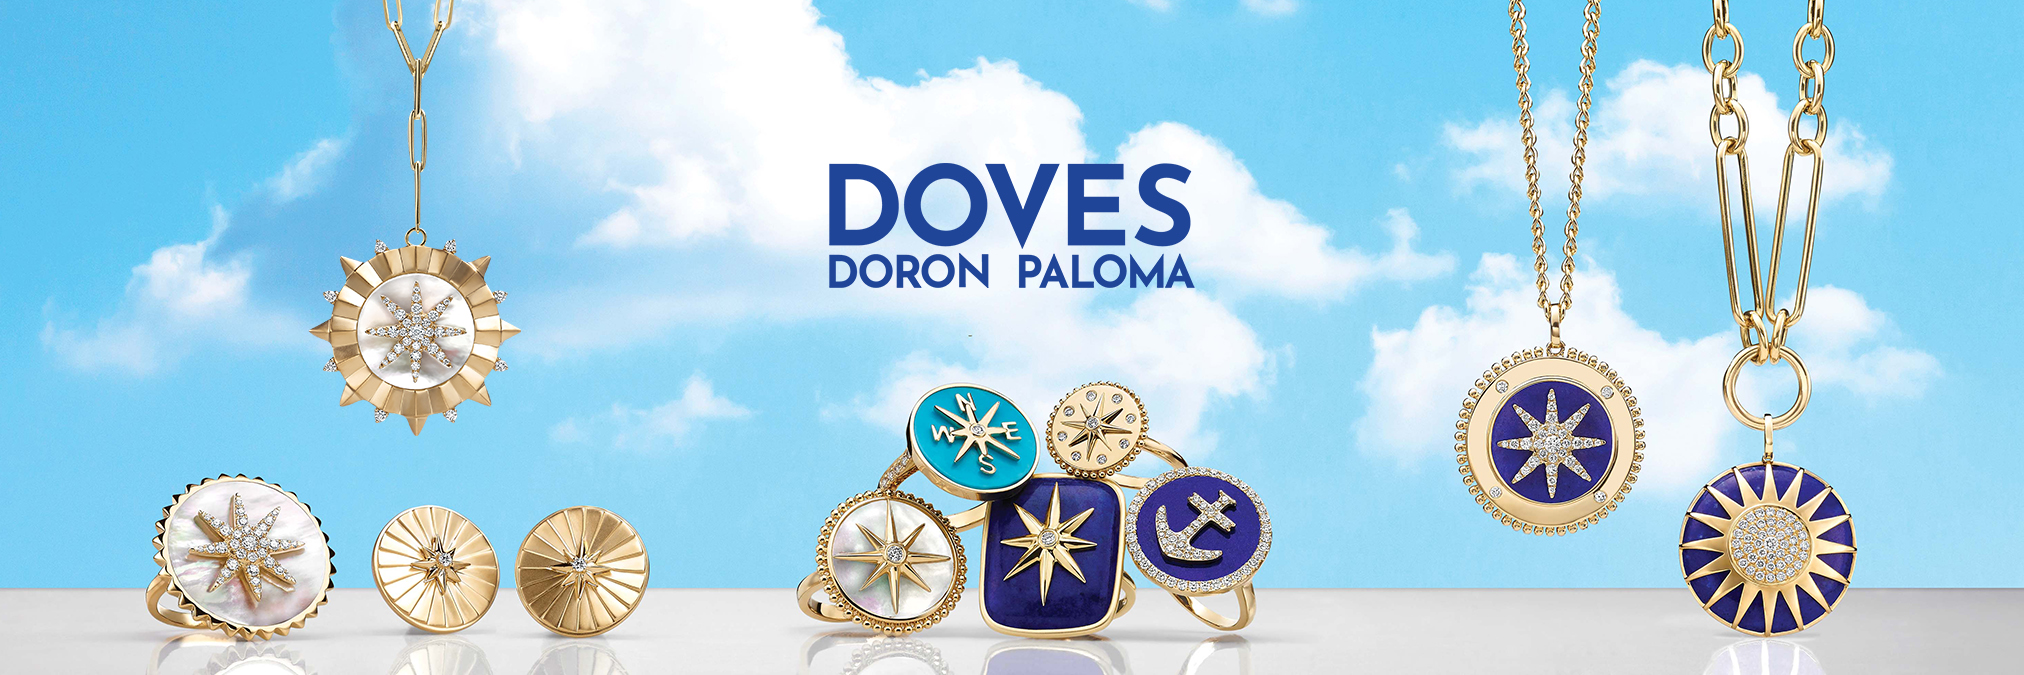 Trice Jewelers Doves by Doron Paloma